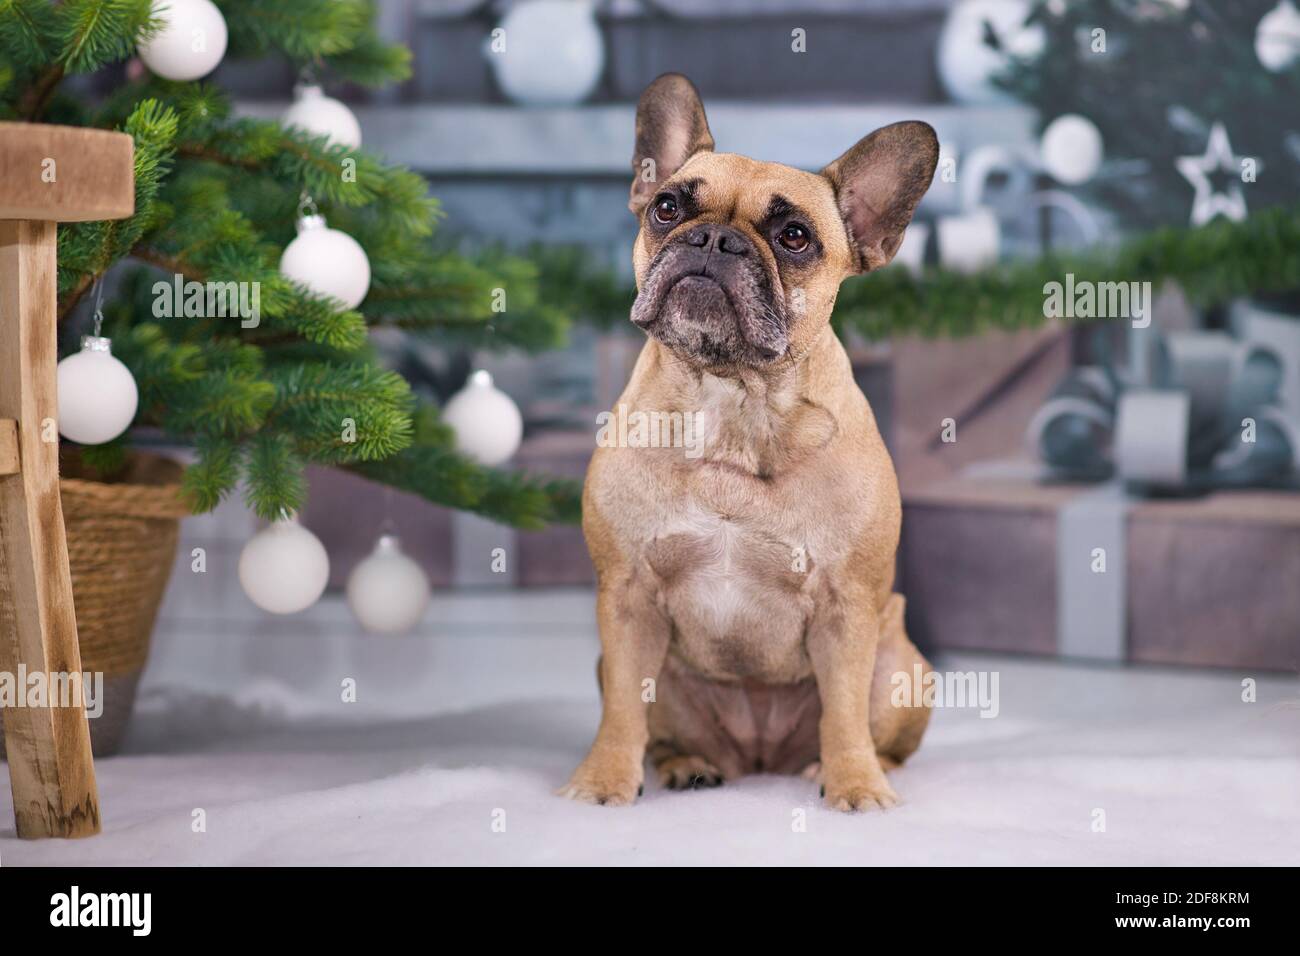 Beautiful French Bulldog dog sitting next to festive Christmas tree with white baubles and gift boxes in blurry background Stock Photo